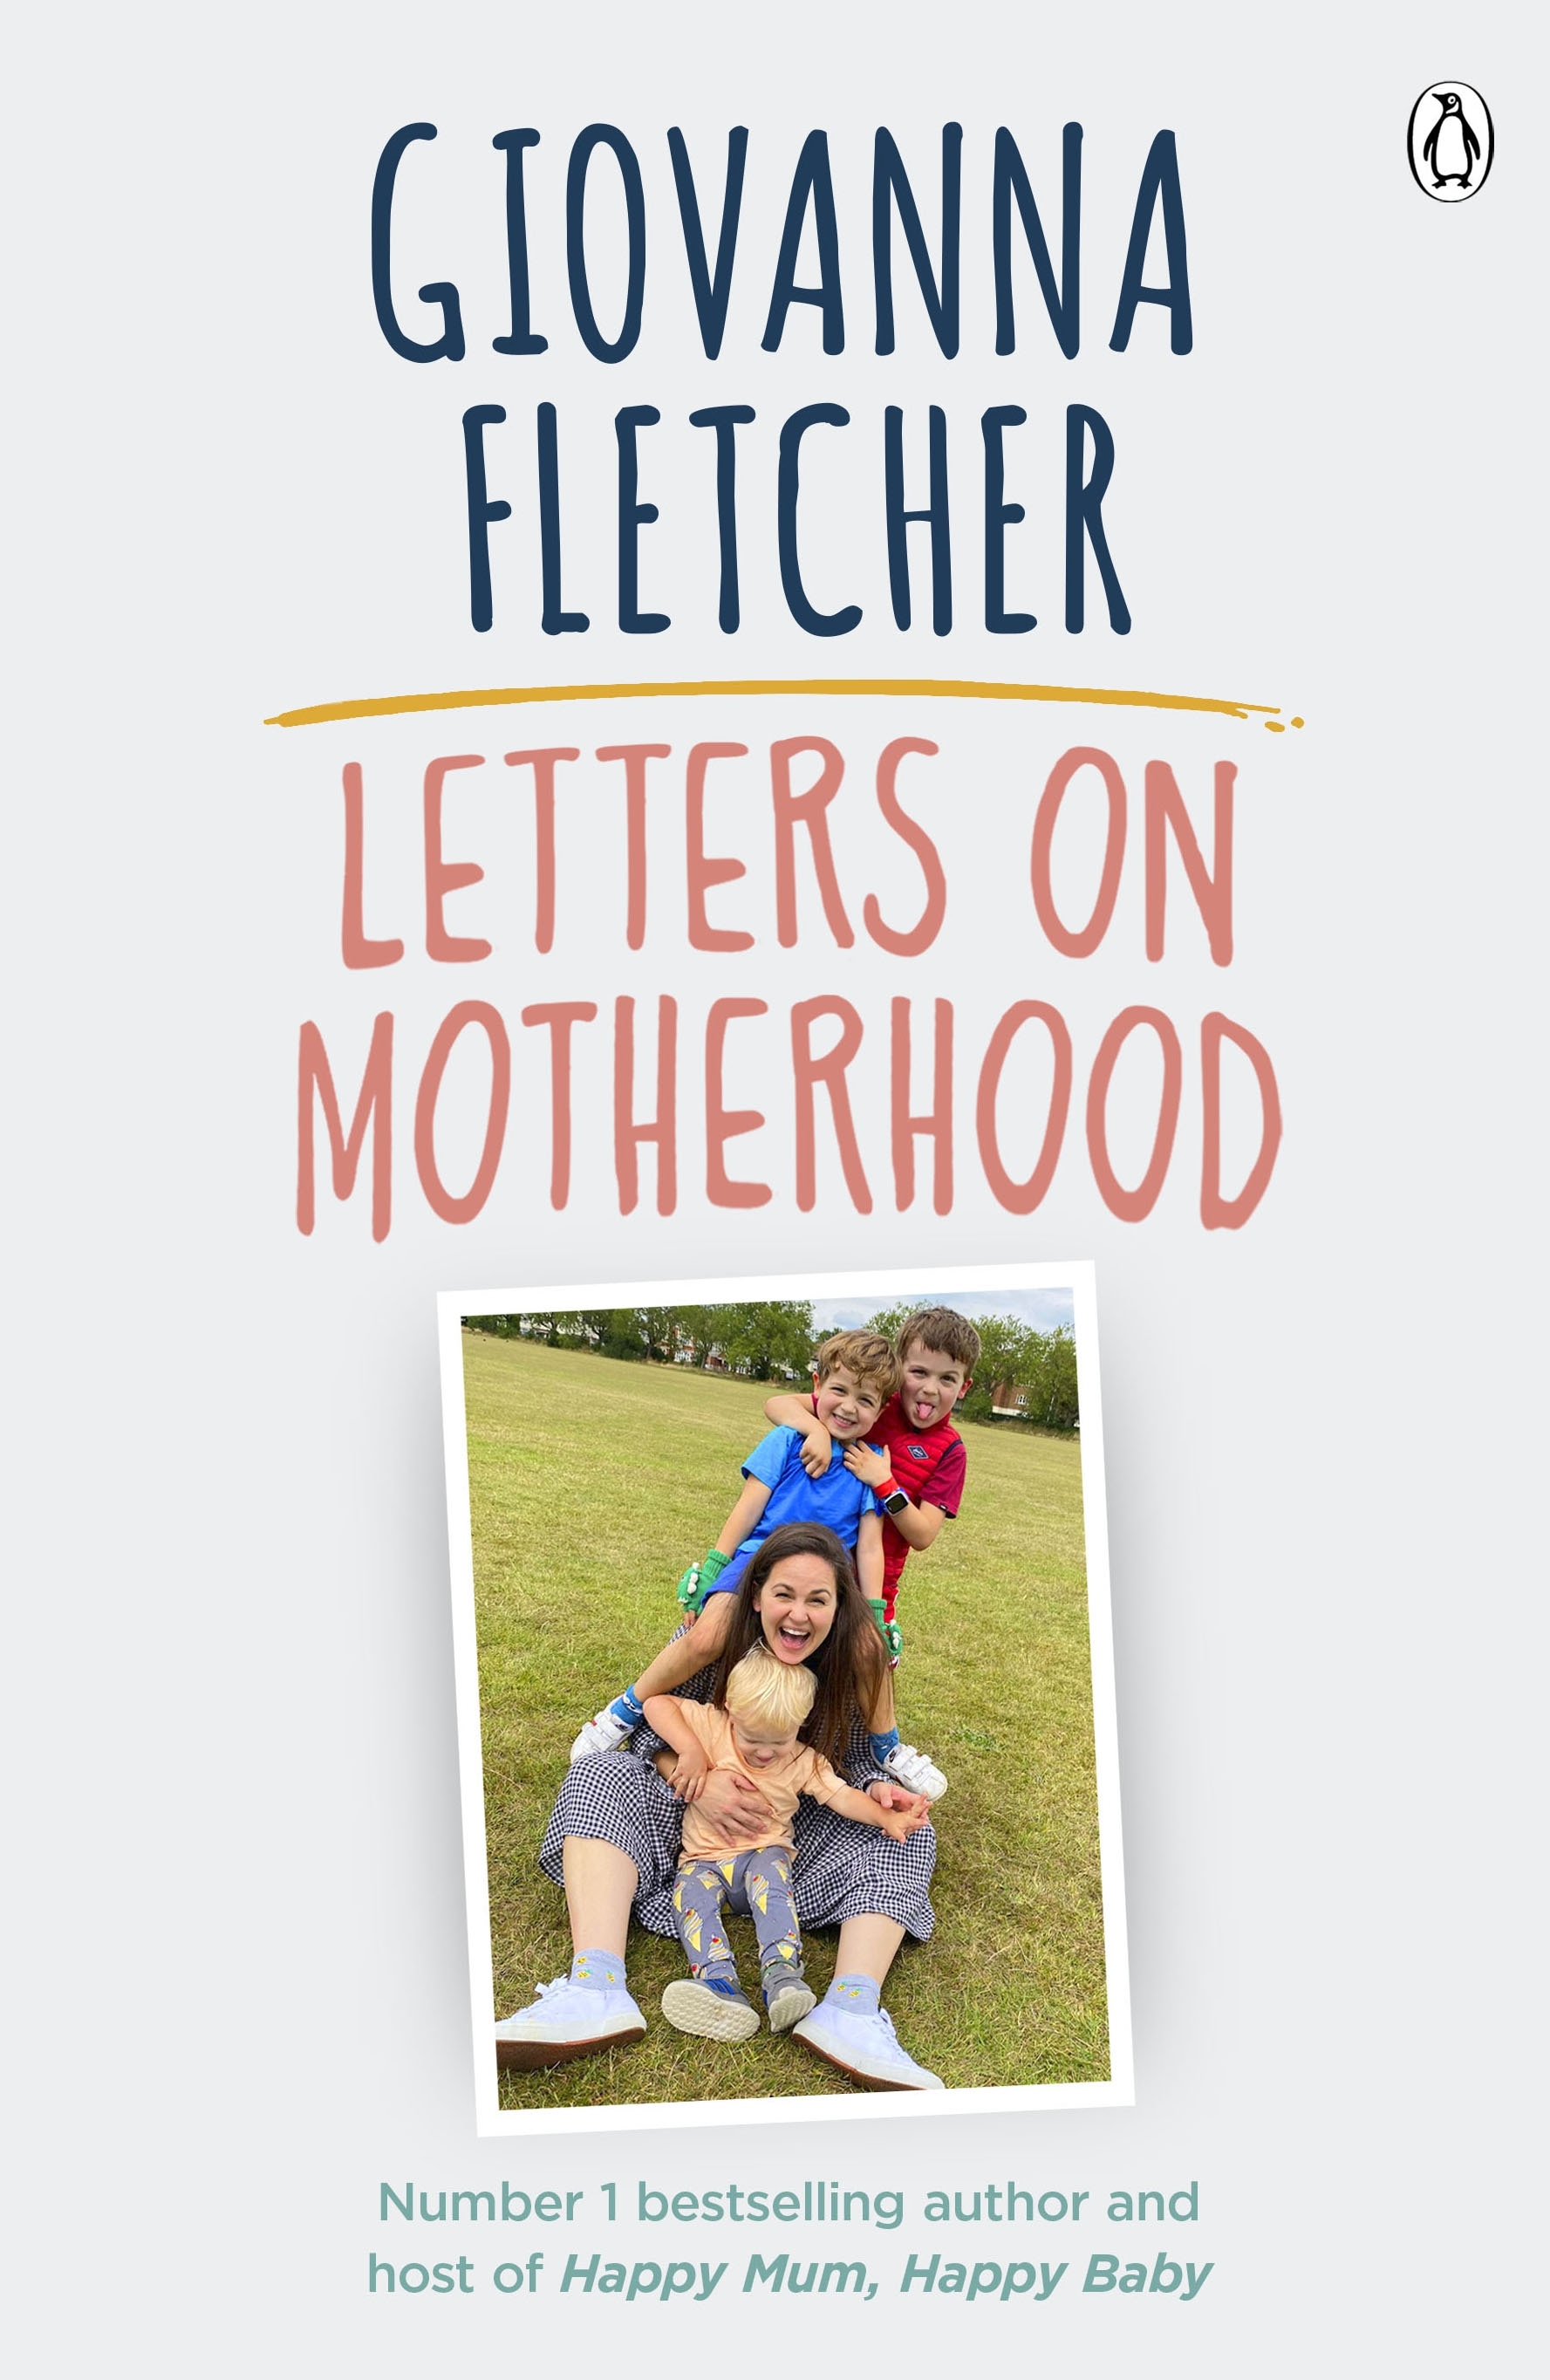 Book “Letters on Motherhood” by Giovanna Fletcher — February 4, 2021